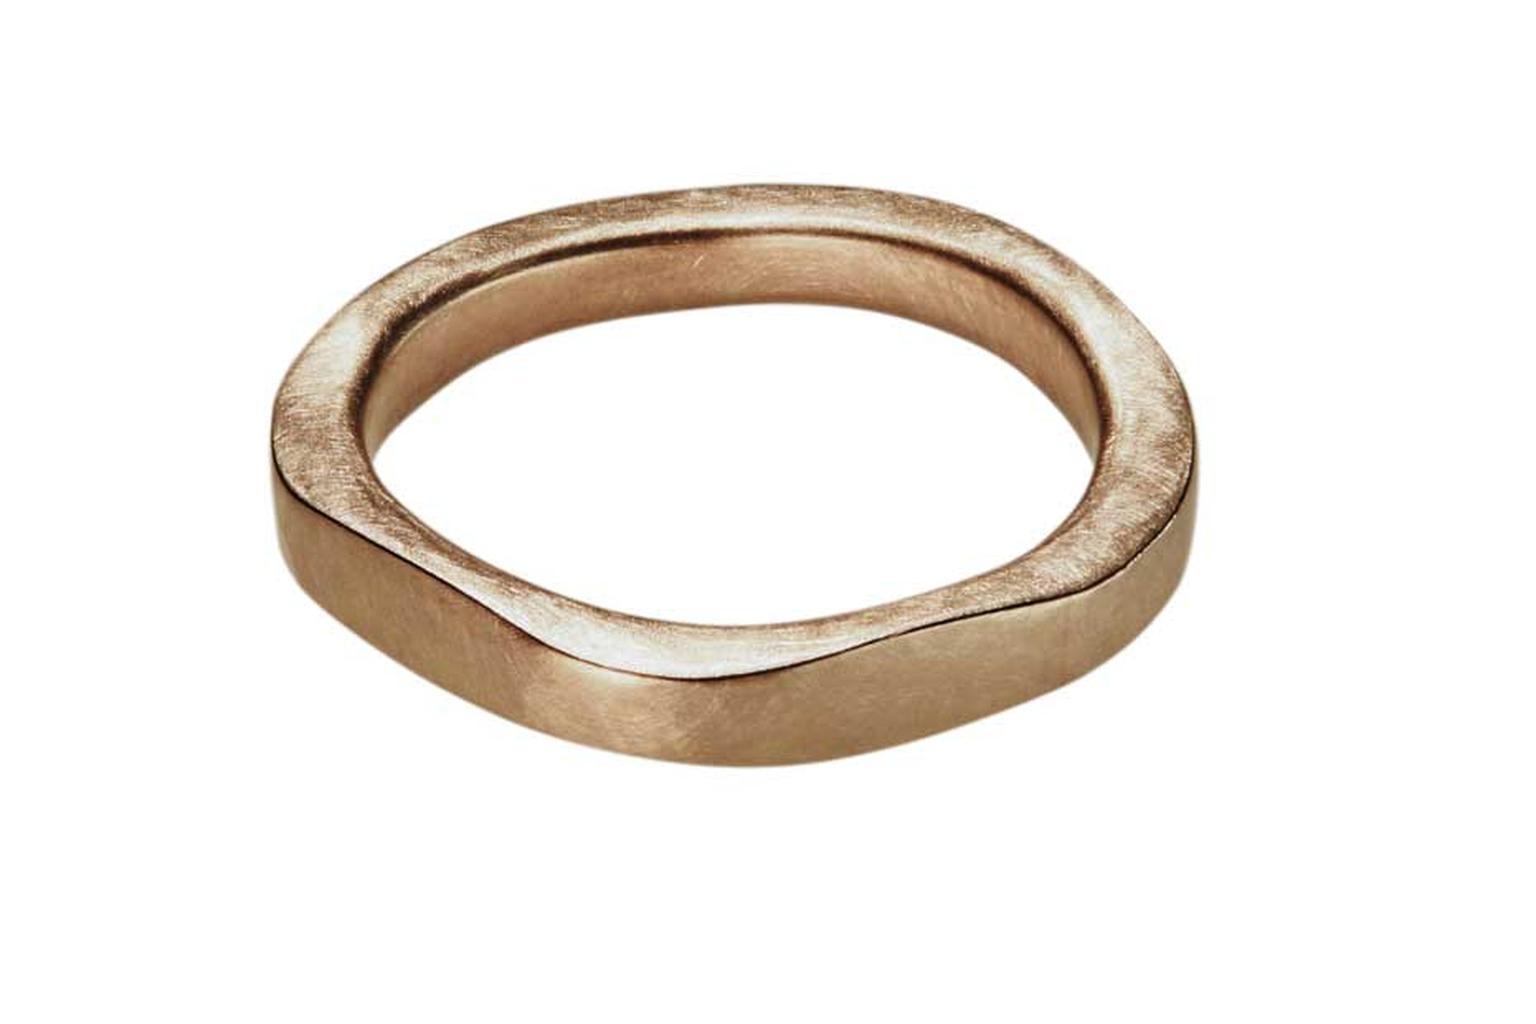 Cox & Power's London forged wedding band in Fairtrade gold.